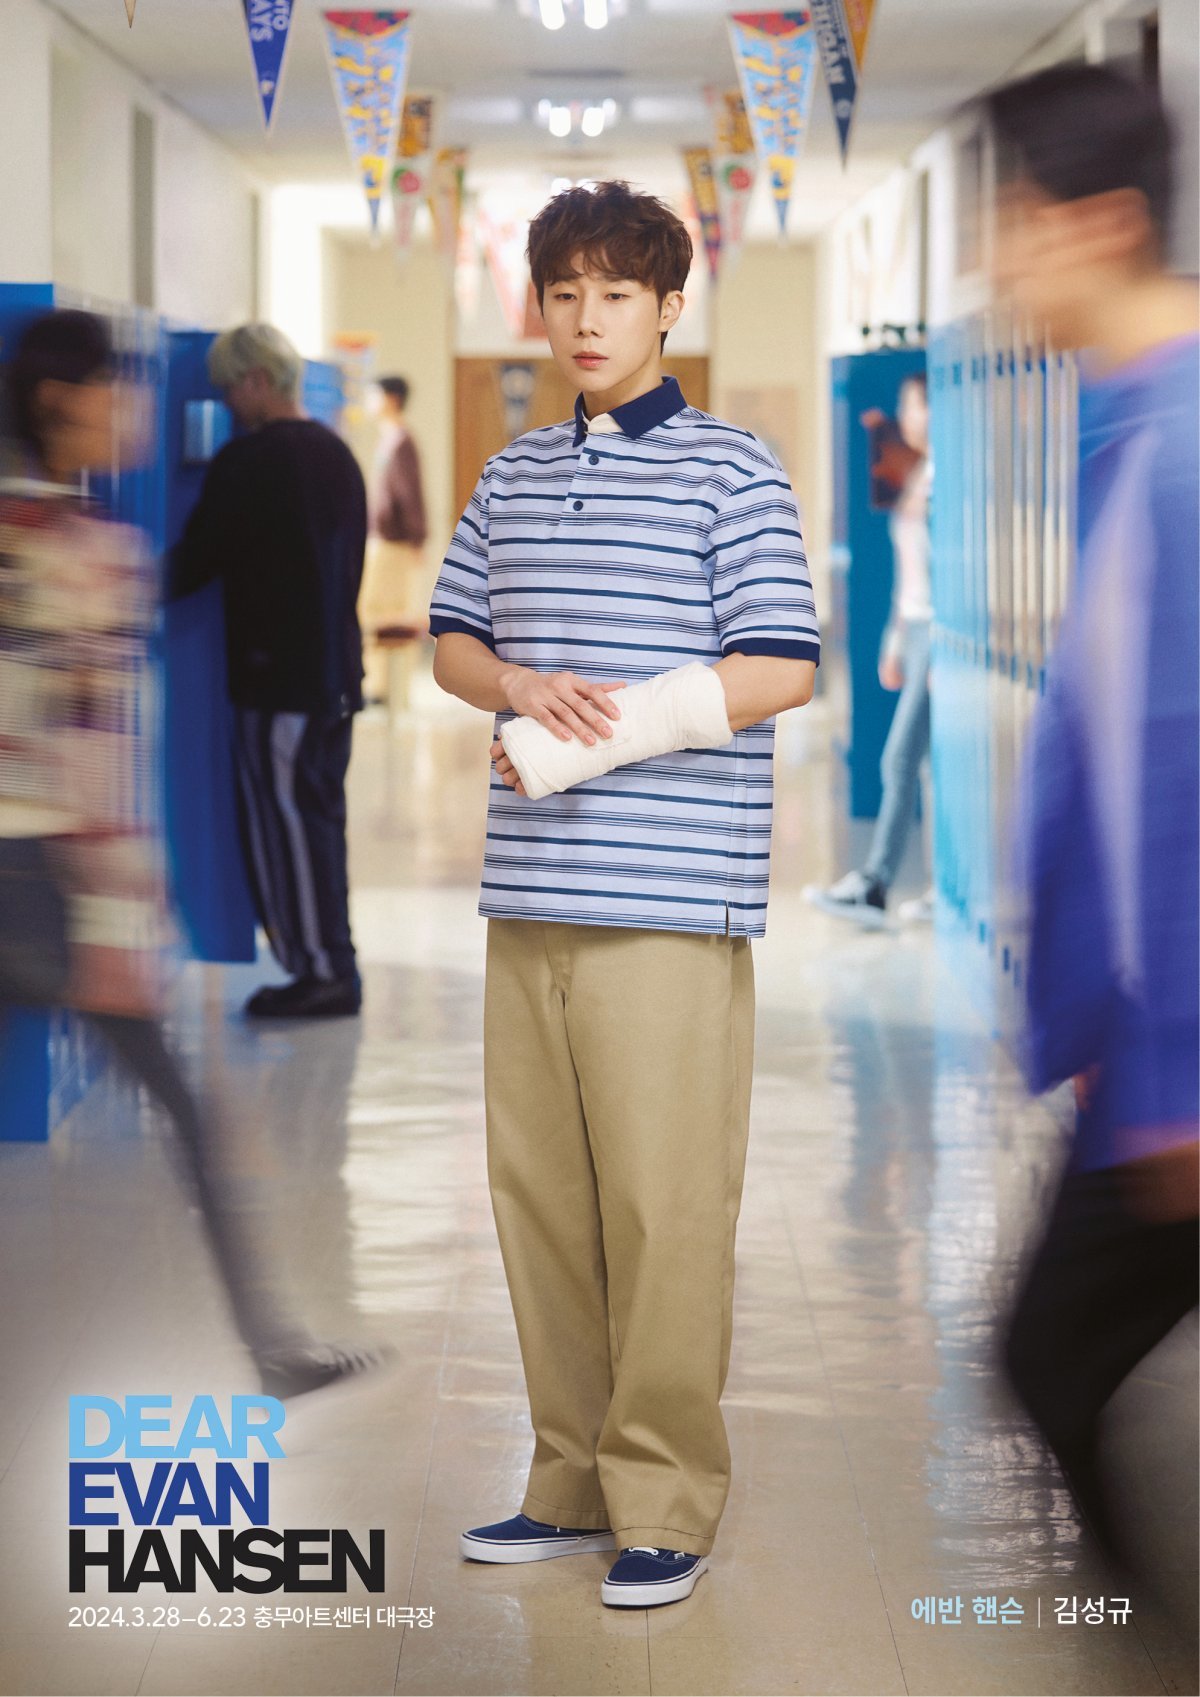 Kim Seong-gyu plays the role of Evan Hansen in the musical ‘Dear Evan Hansen.’  Provided by S&CO